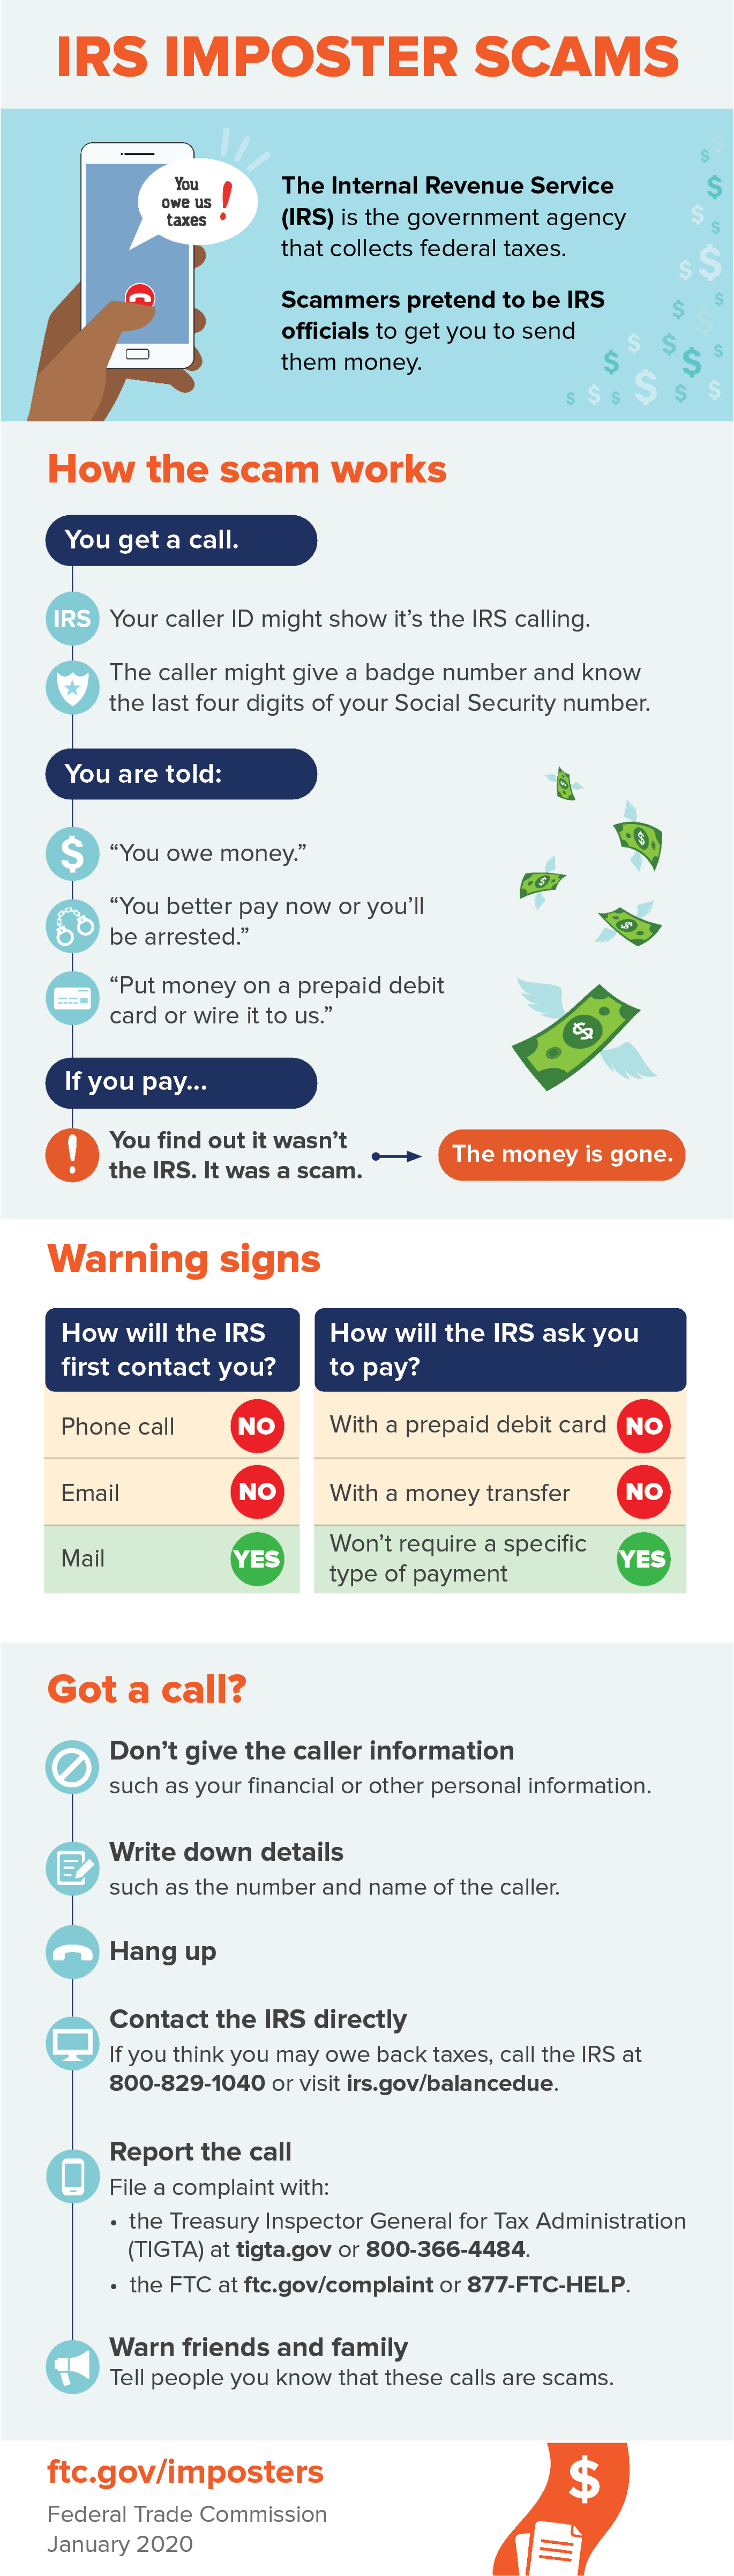 IRS Imposter Scams: Scammers pretend to be IRS officials to get you to send them money.